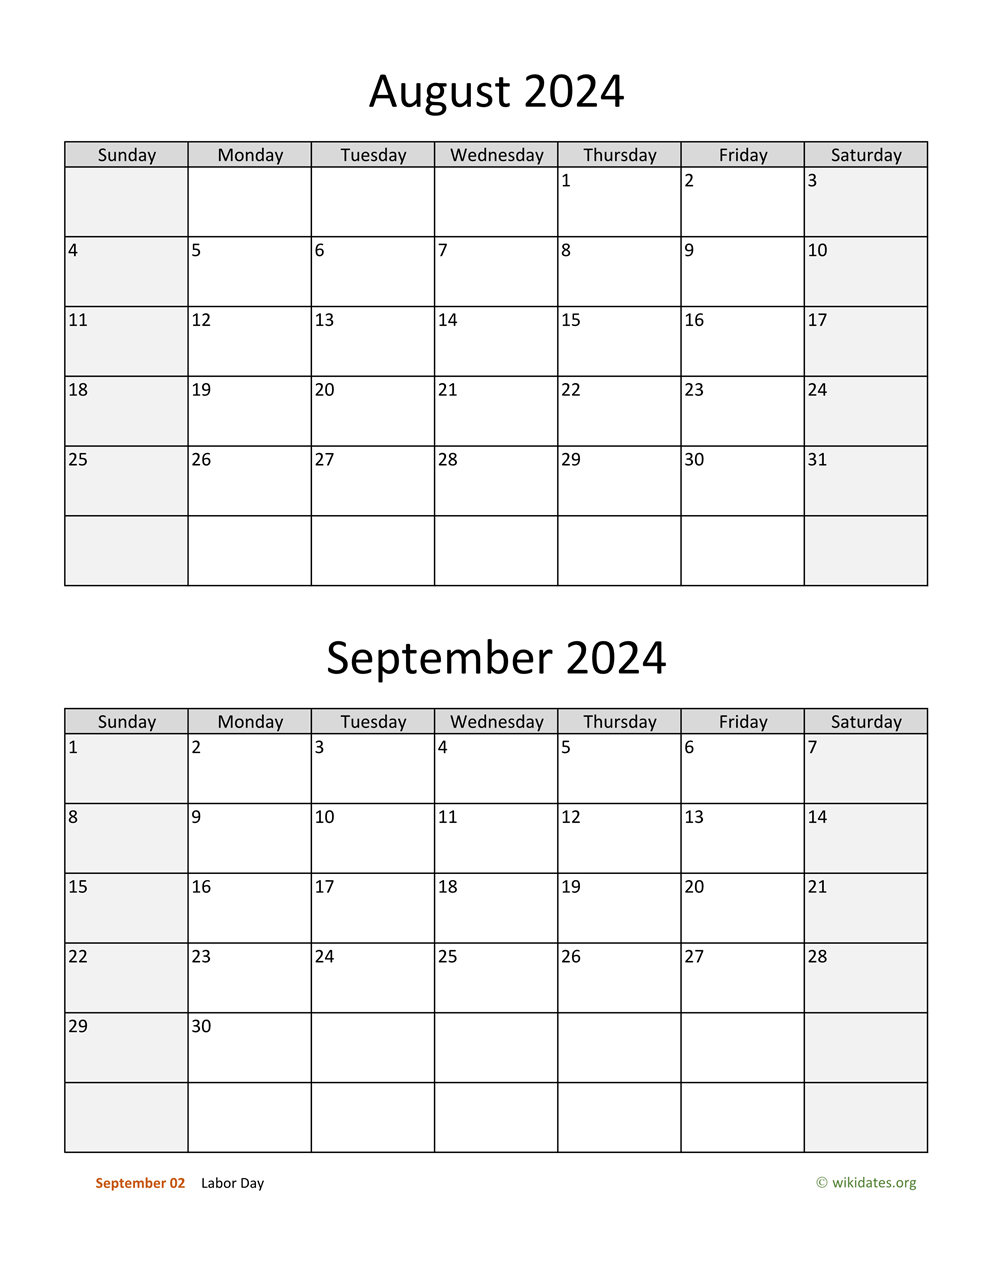 August And September 2024 Calendar | Wikidates for August September 2024 Calendar Printable